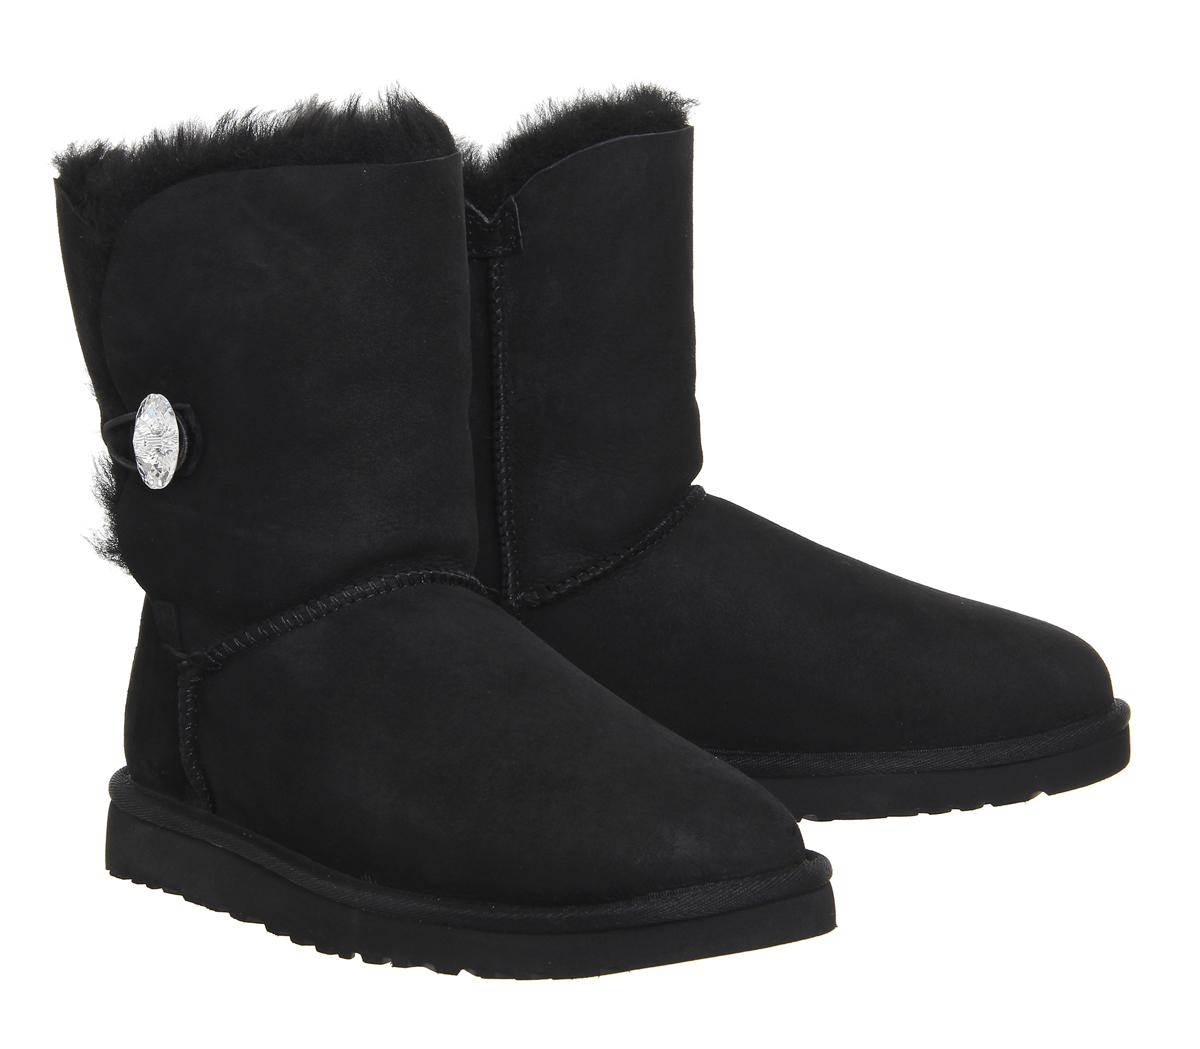 Ugg Bailey Button Bling Boots in Black | Lyst